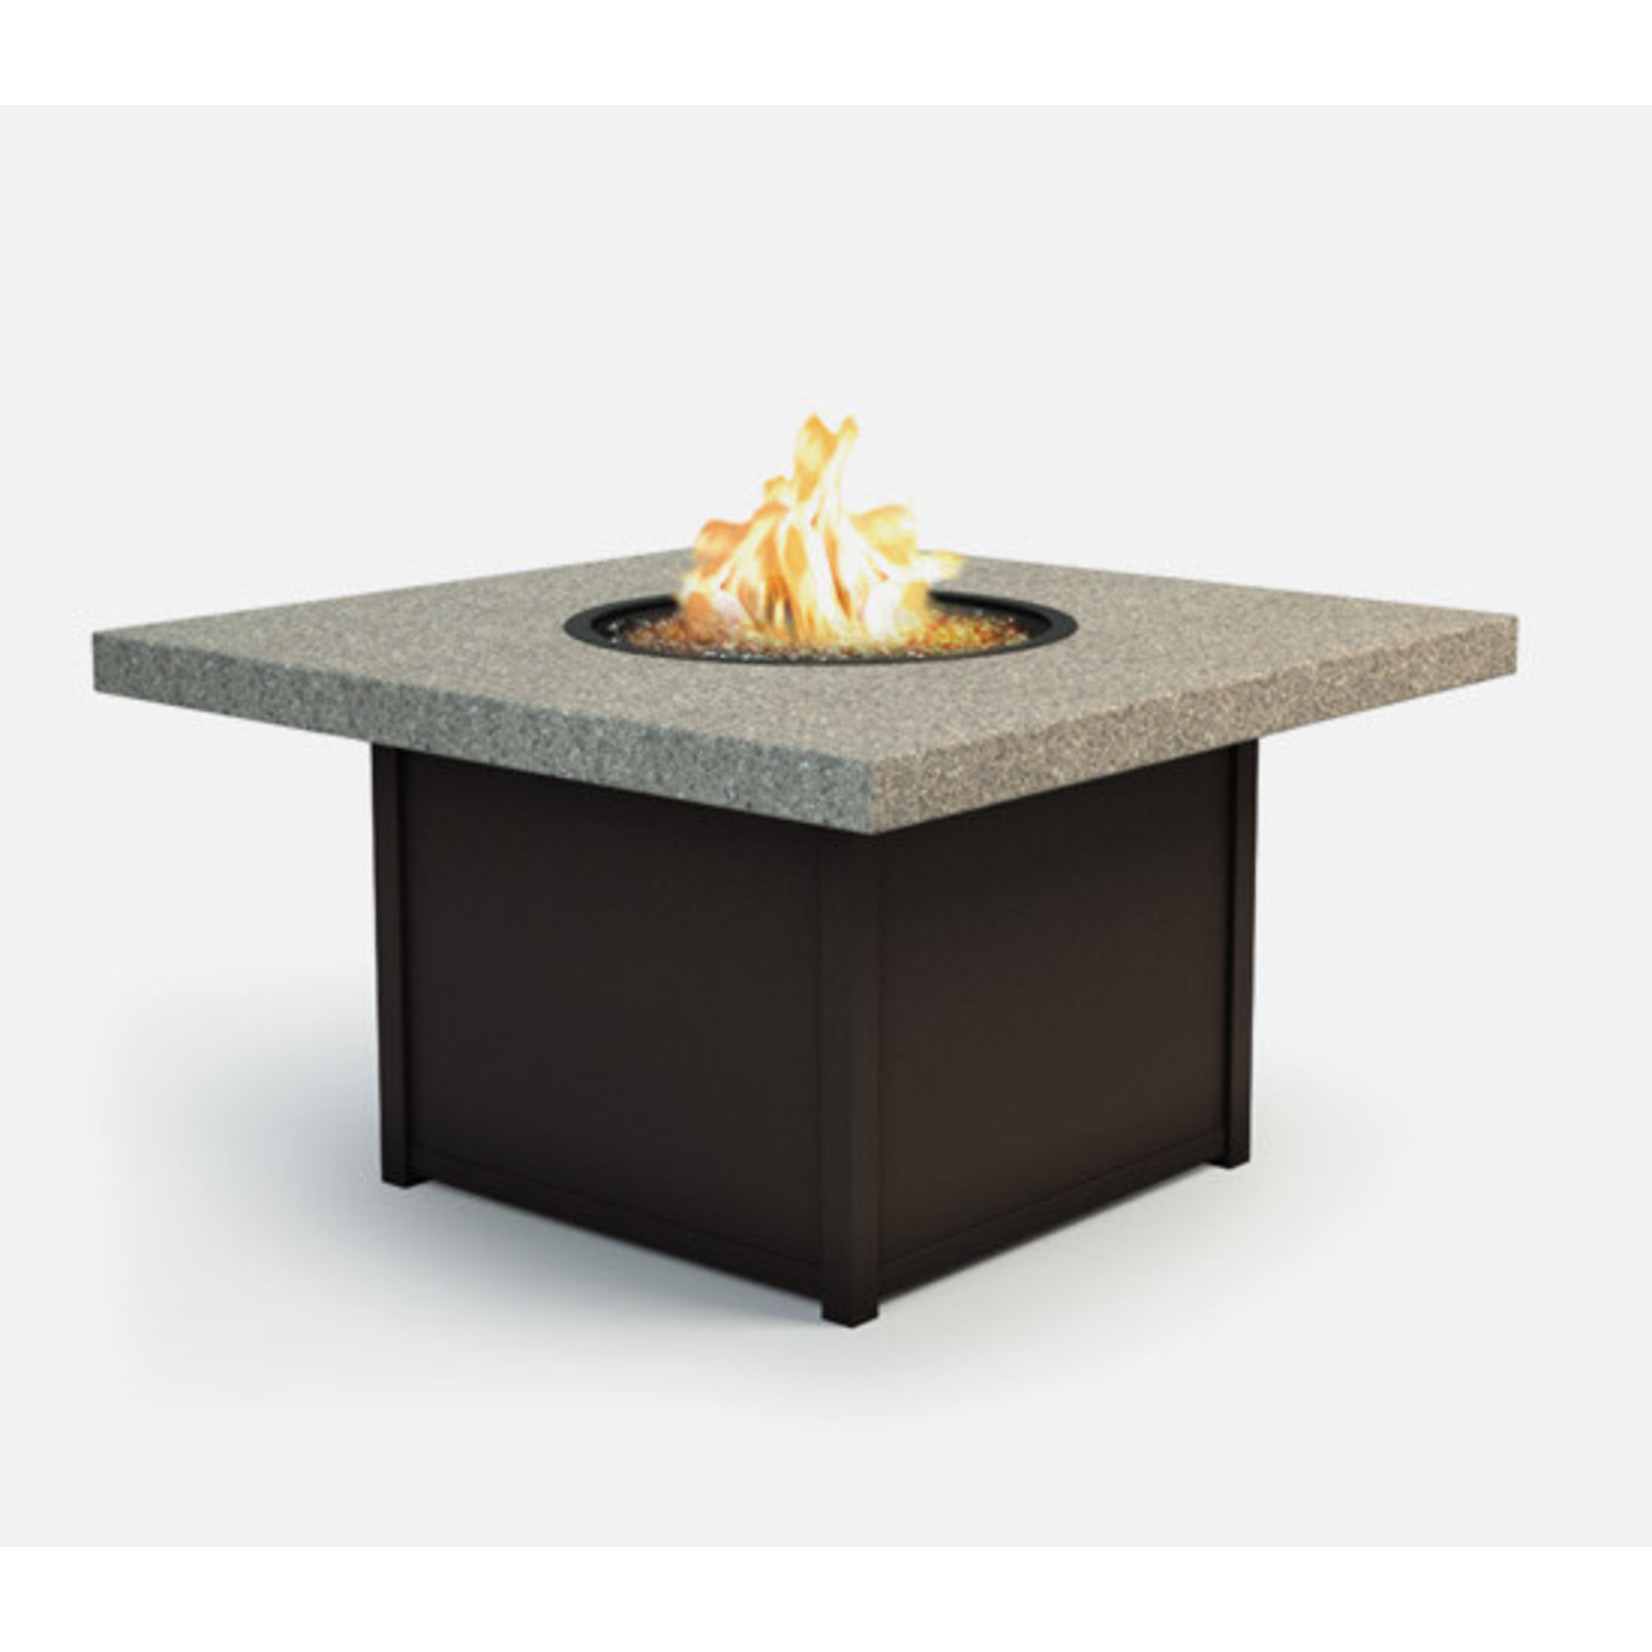 HOMECREST STONEGATE 42" SQUARE CHAT FIRE TABLE